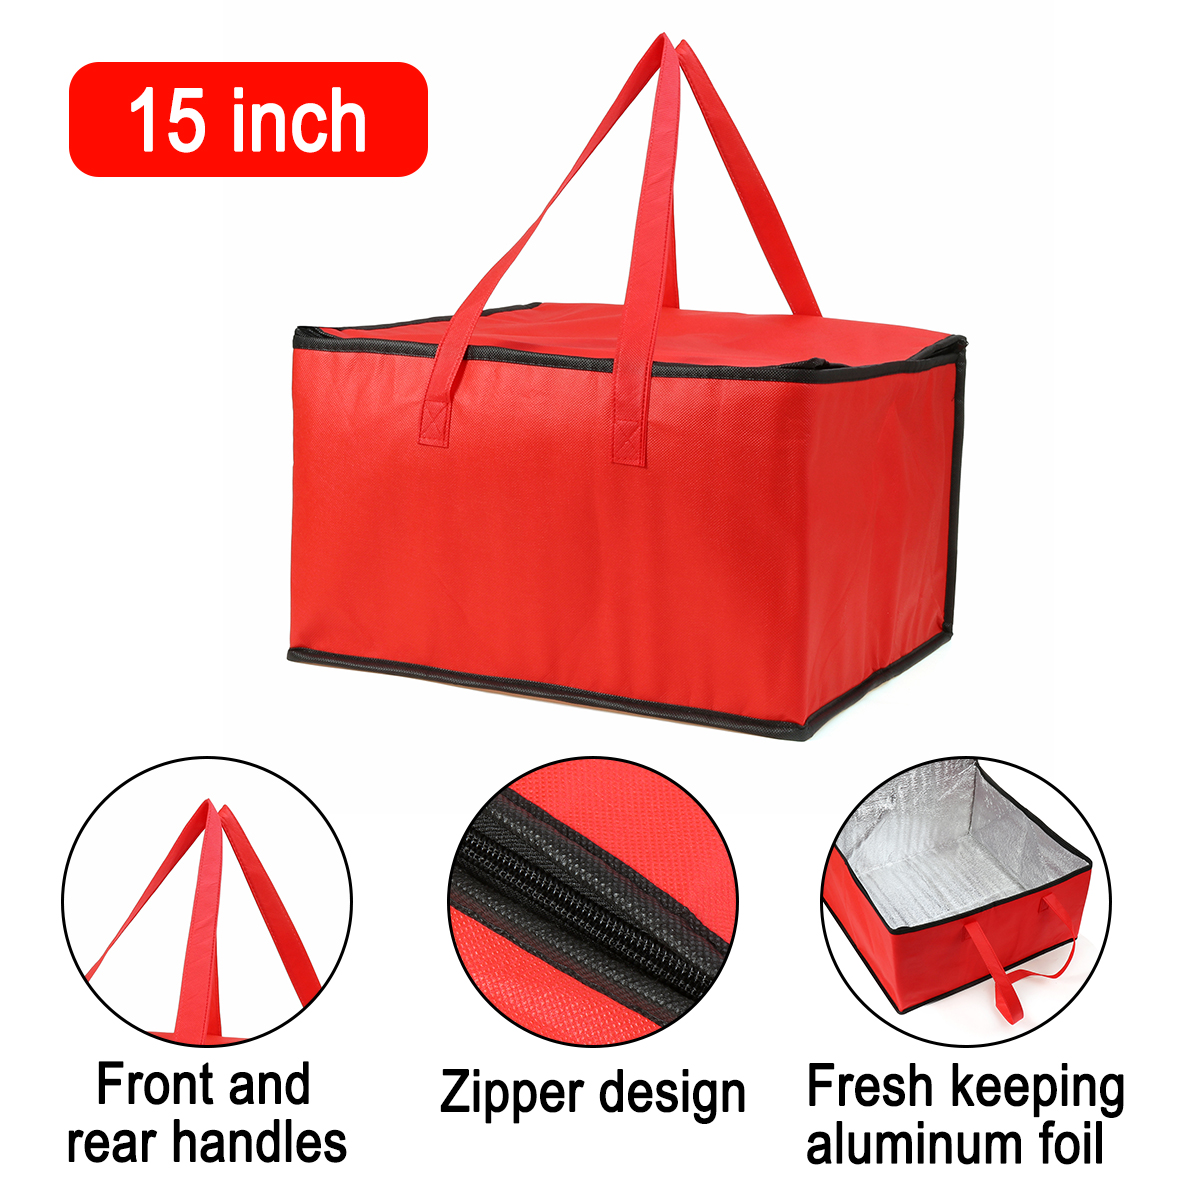 12inch-Picnic-Bag-Food-Insulated-Bag-Camping-BBQ-Lunch-Bag-Portable-Pizza-Food-Pizza-Delivery-Bag-1637132-3